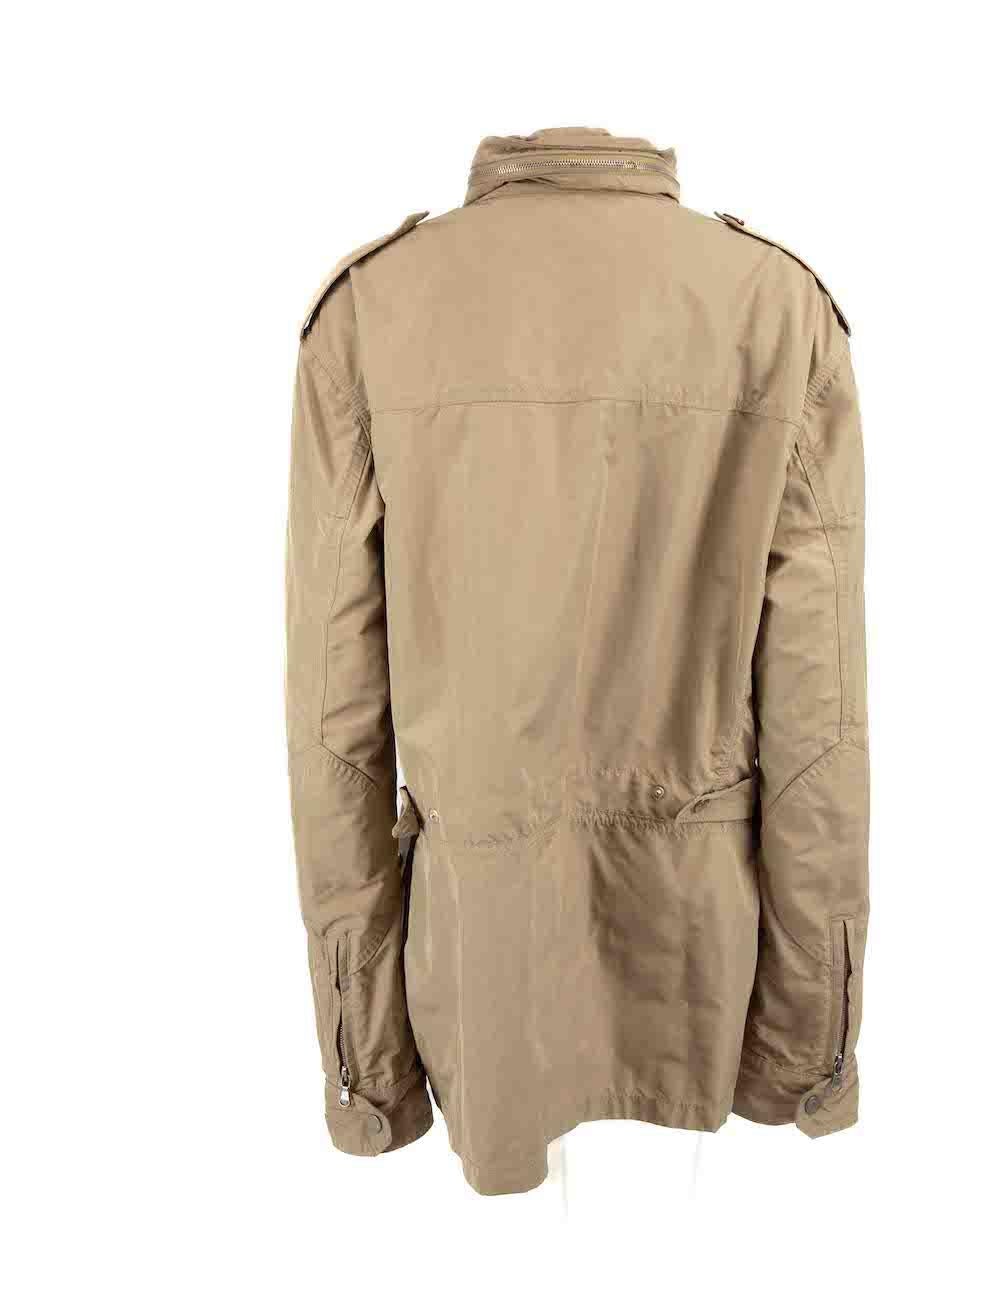 Moncler Beige Utility Jacket with Collapsible Hood Size IT52 In Good Condition For Sale In London, GB